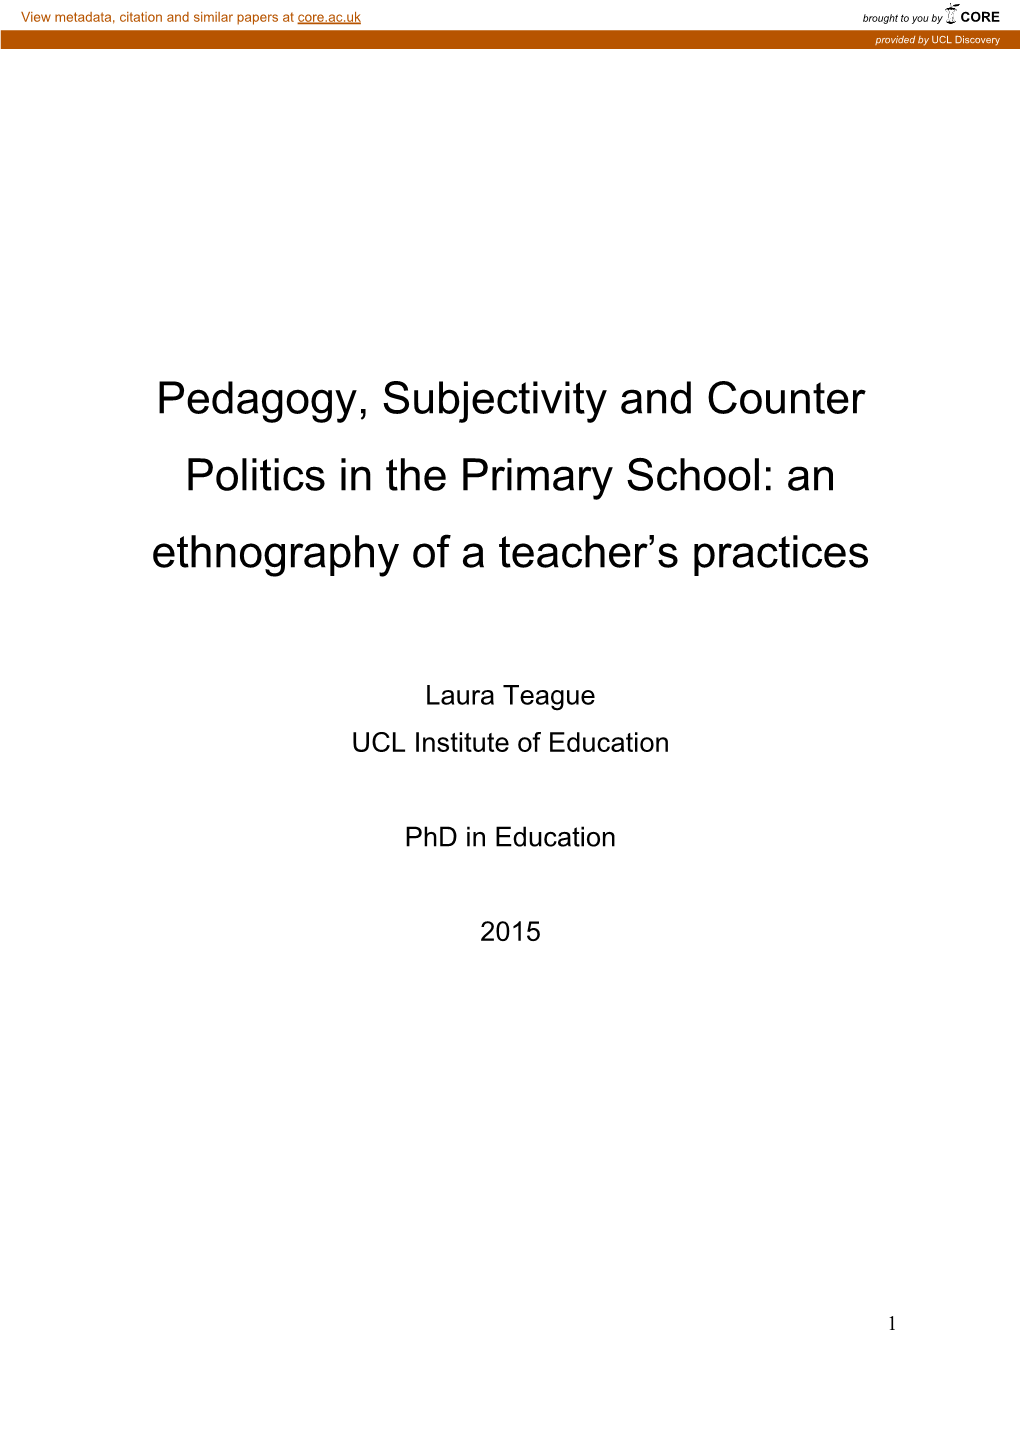 Pedagogy, Subjectivity and Counter Politics in the Primary School: an Ethnography of a Teacher’S Practices